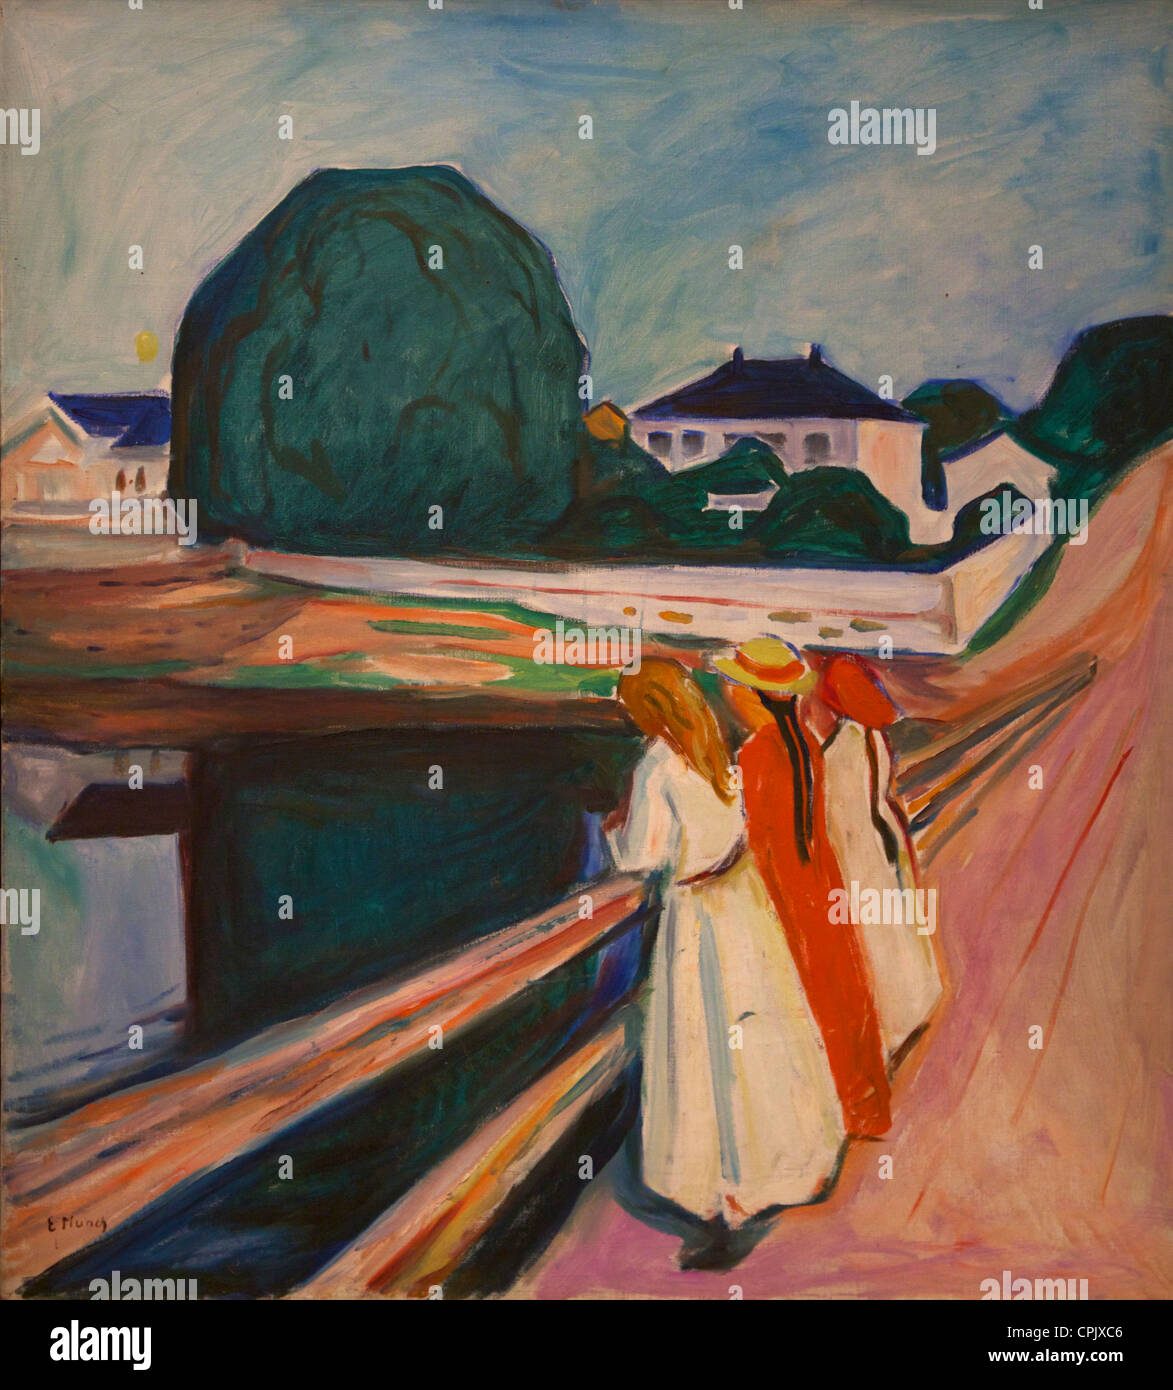 Girls on Bridge, 1927, by Edvard Munch, in the Munch Museum and Art Gallery, Munch-Museet, Oslo, Norway, Europe Stock Photo